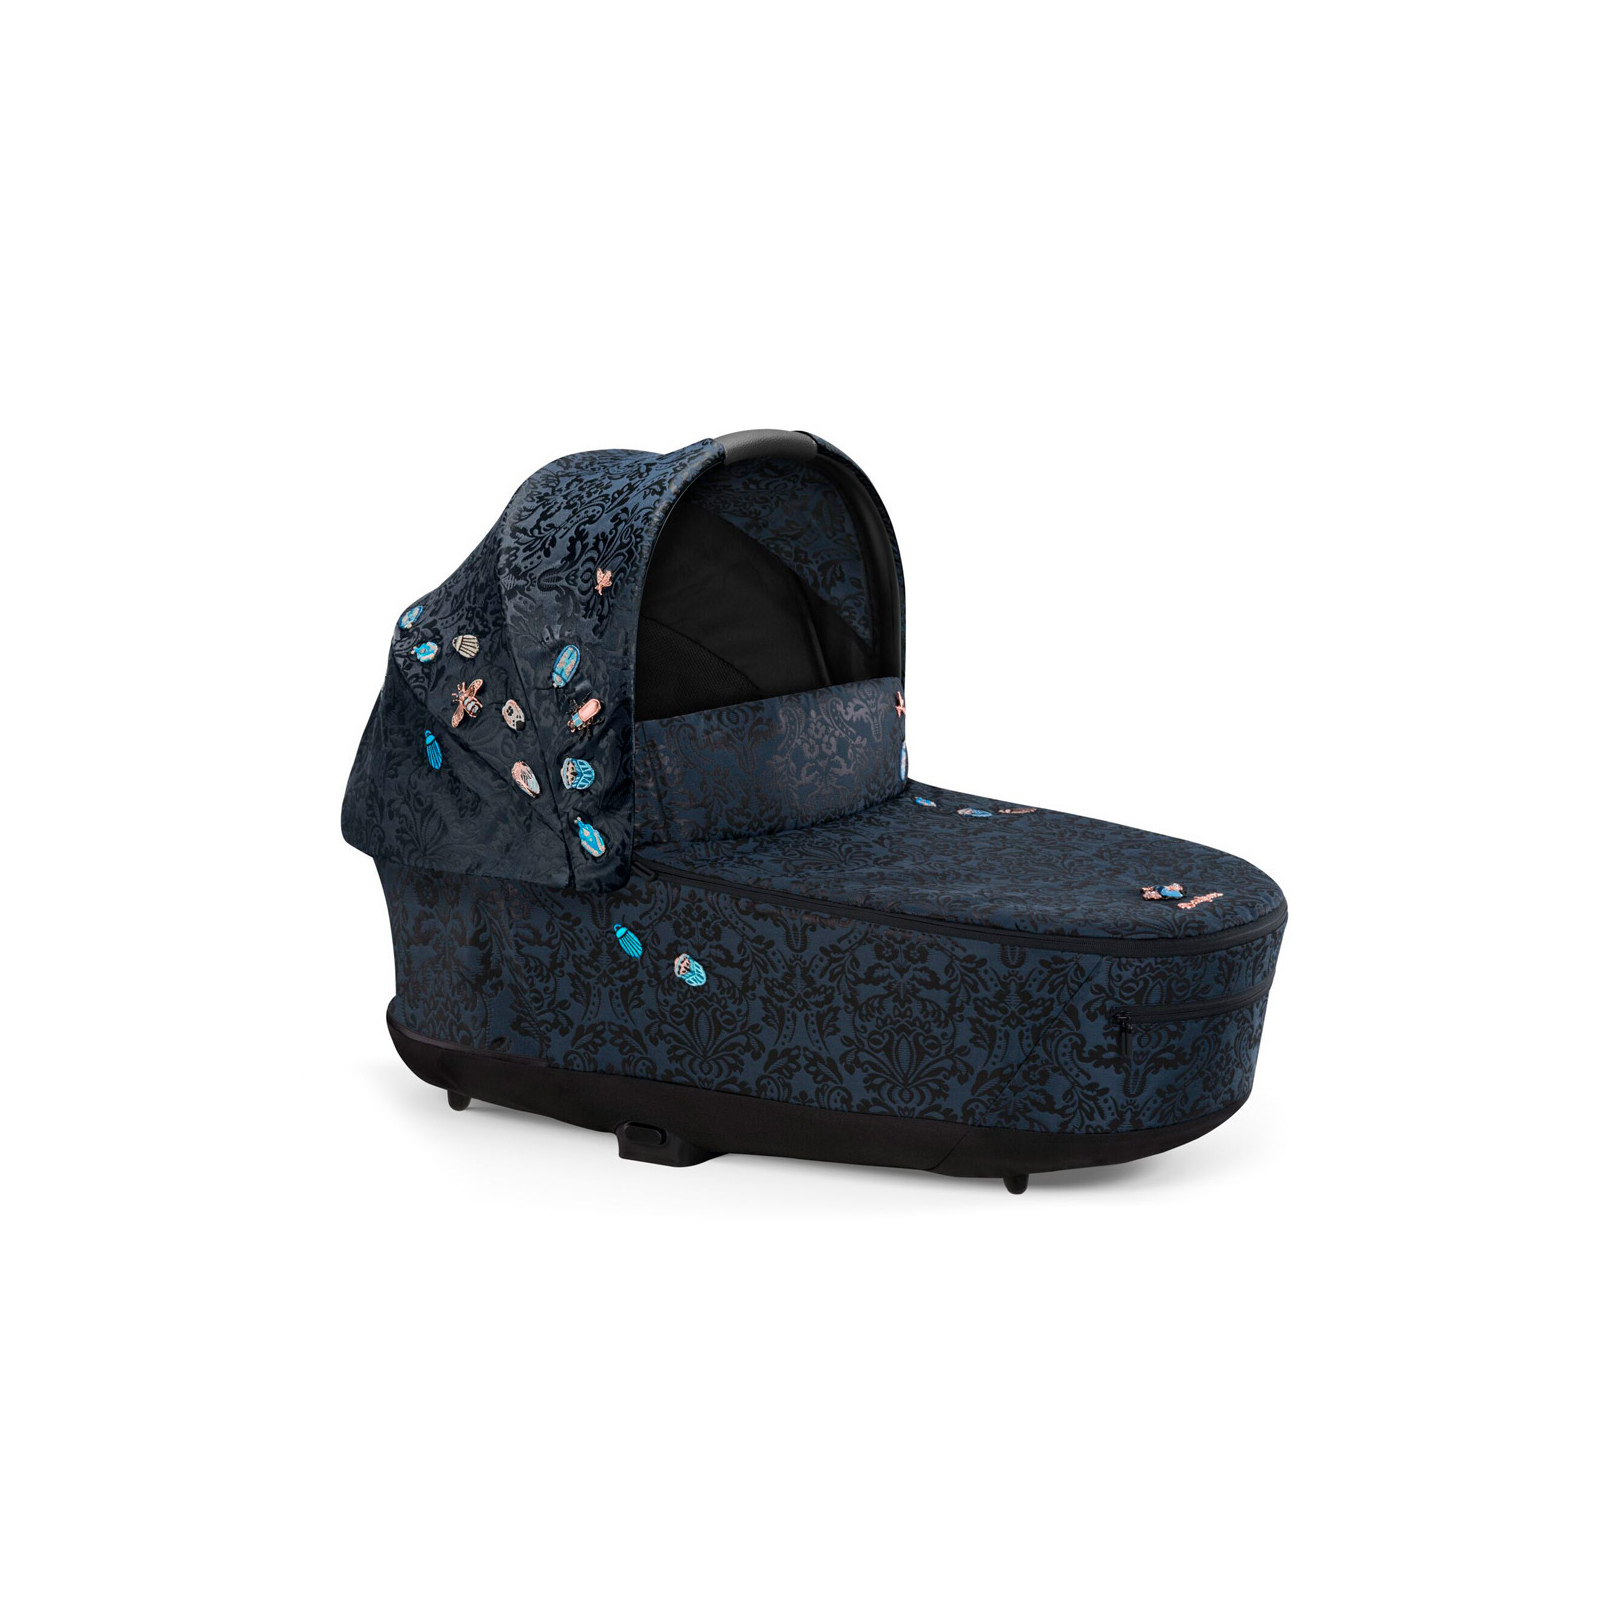 Люлька Cybex Priam Lux R Jewels of Nature (522000923)